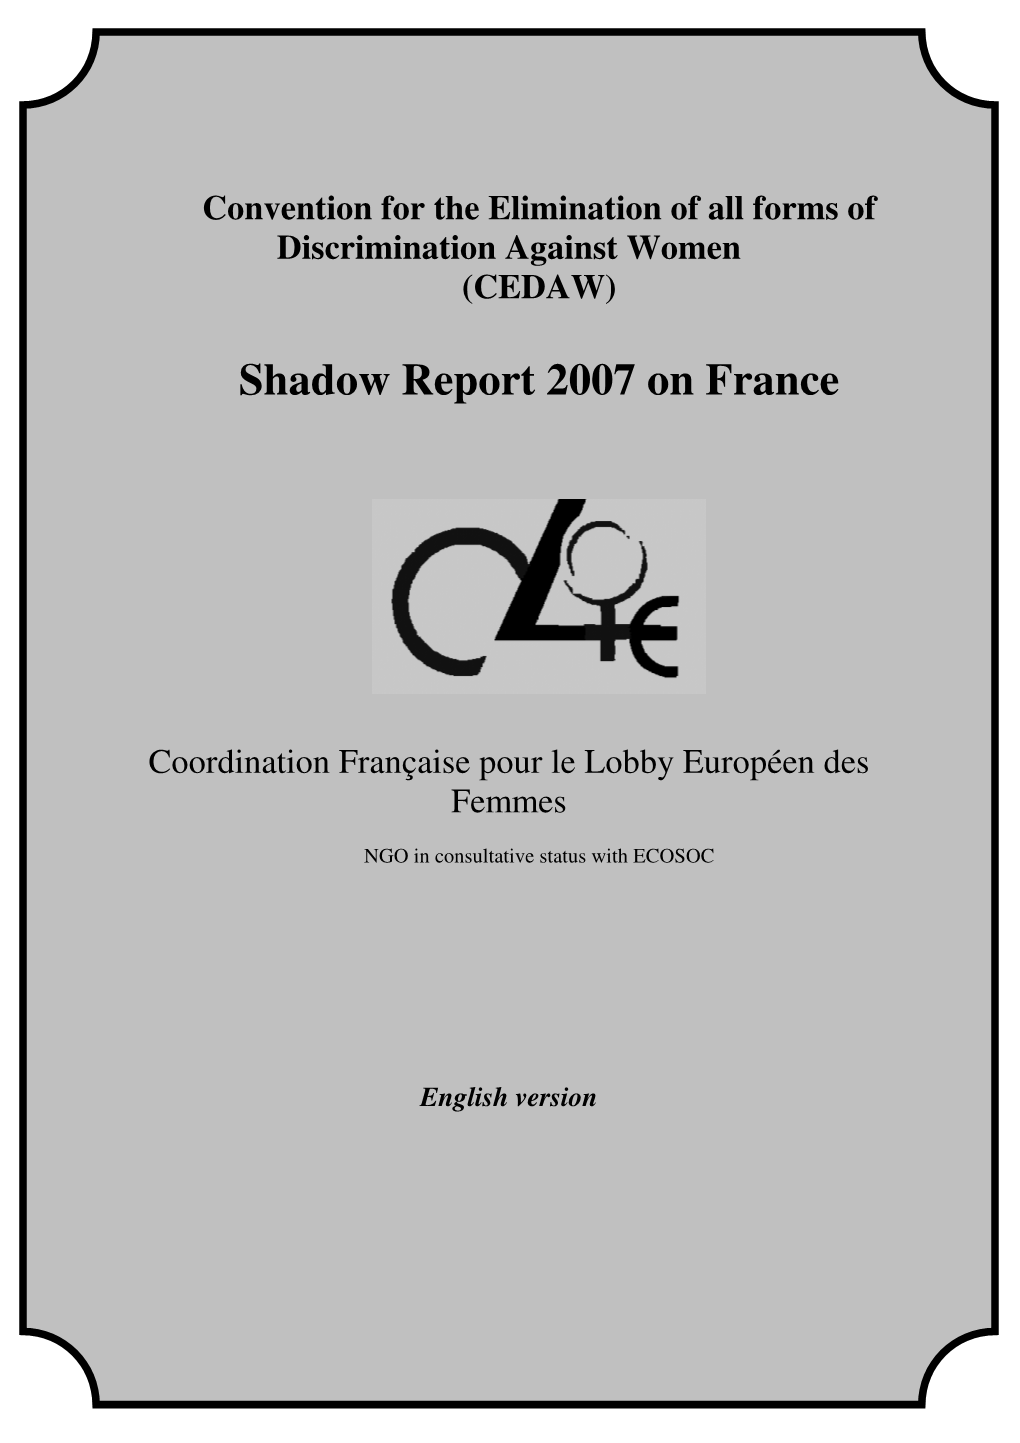 (CEDAW) Shadow Report 2007 on France